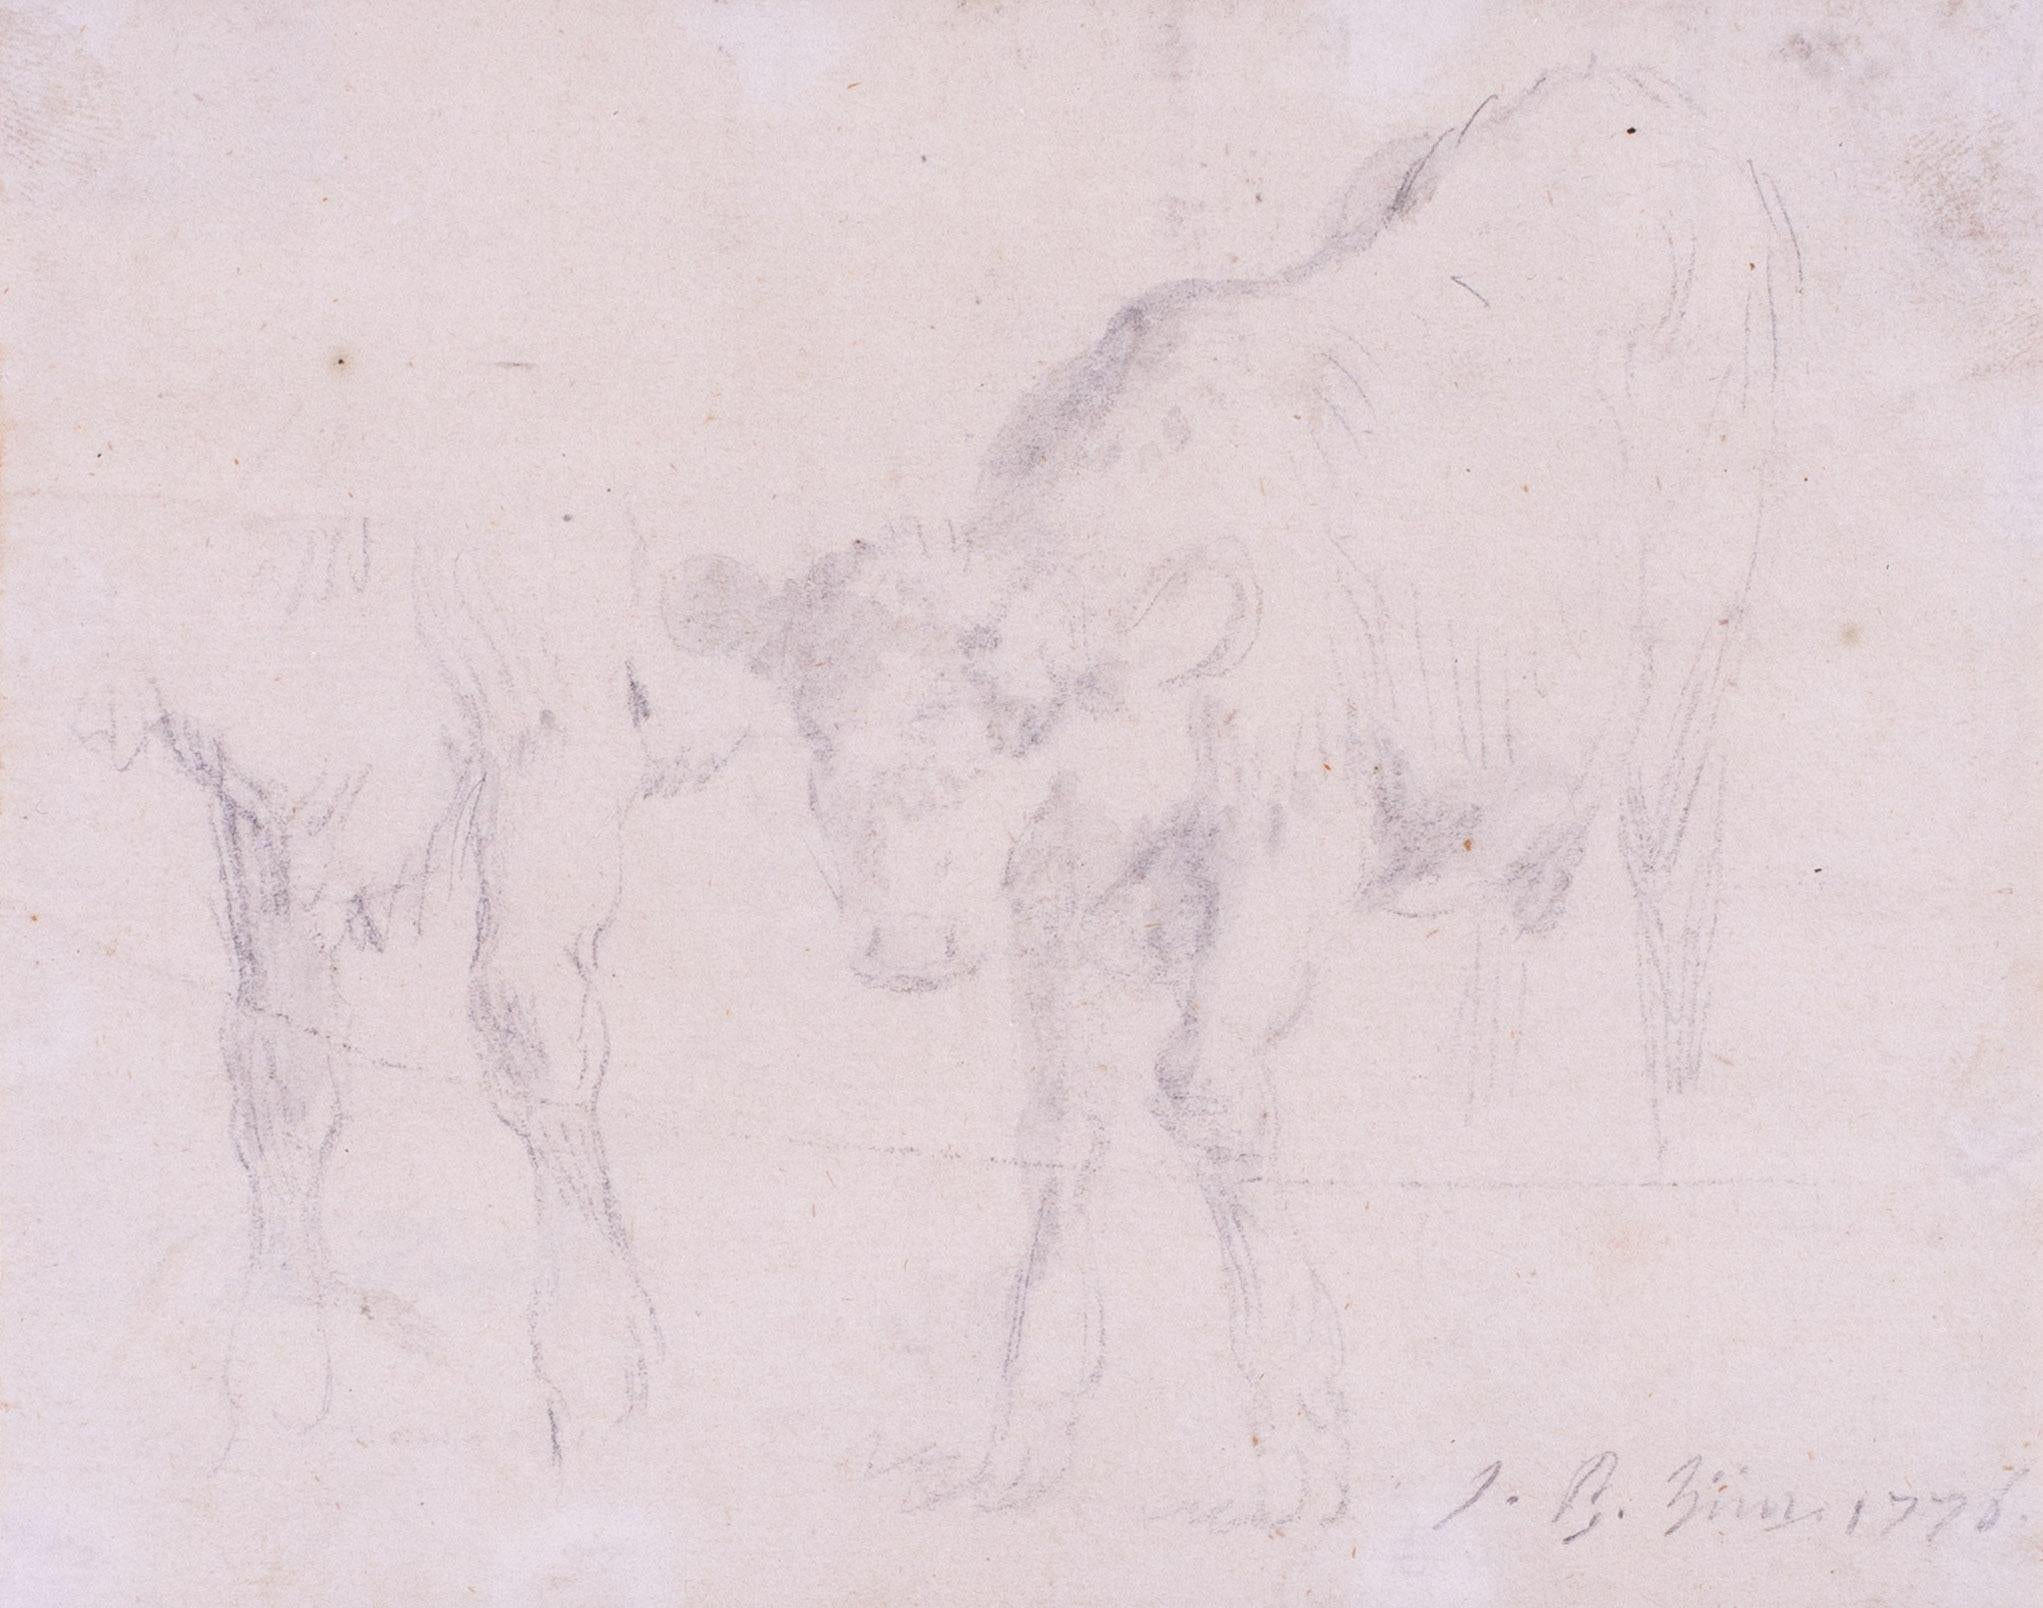 A rare and charming study of cows by 18th Century French painter, engraver and designer Jean-Baptiste Huet.

The details are:
Jean Baptiste Huet (French, 1745 – 1811)
Study of cows
Pencil
Signed and adated ‘J.B. Huet 1776’ (lower right)
4.1/4 x